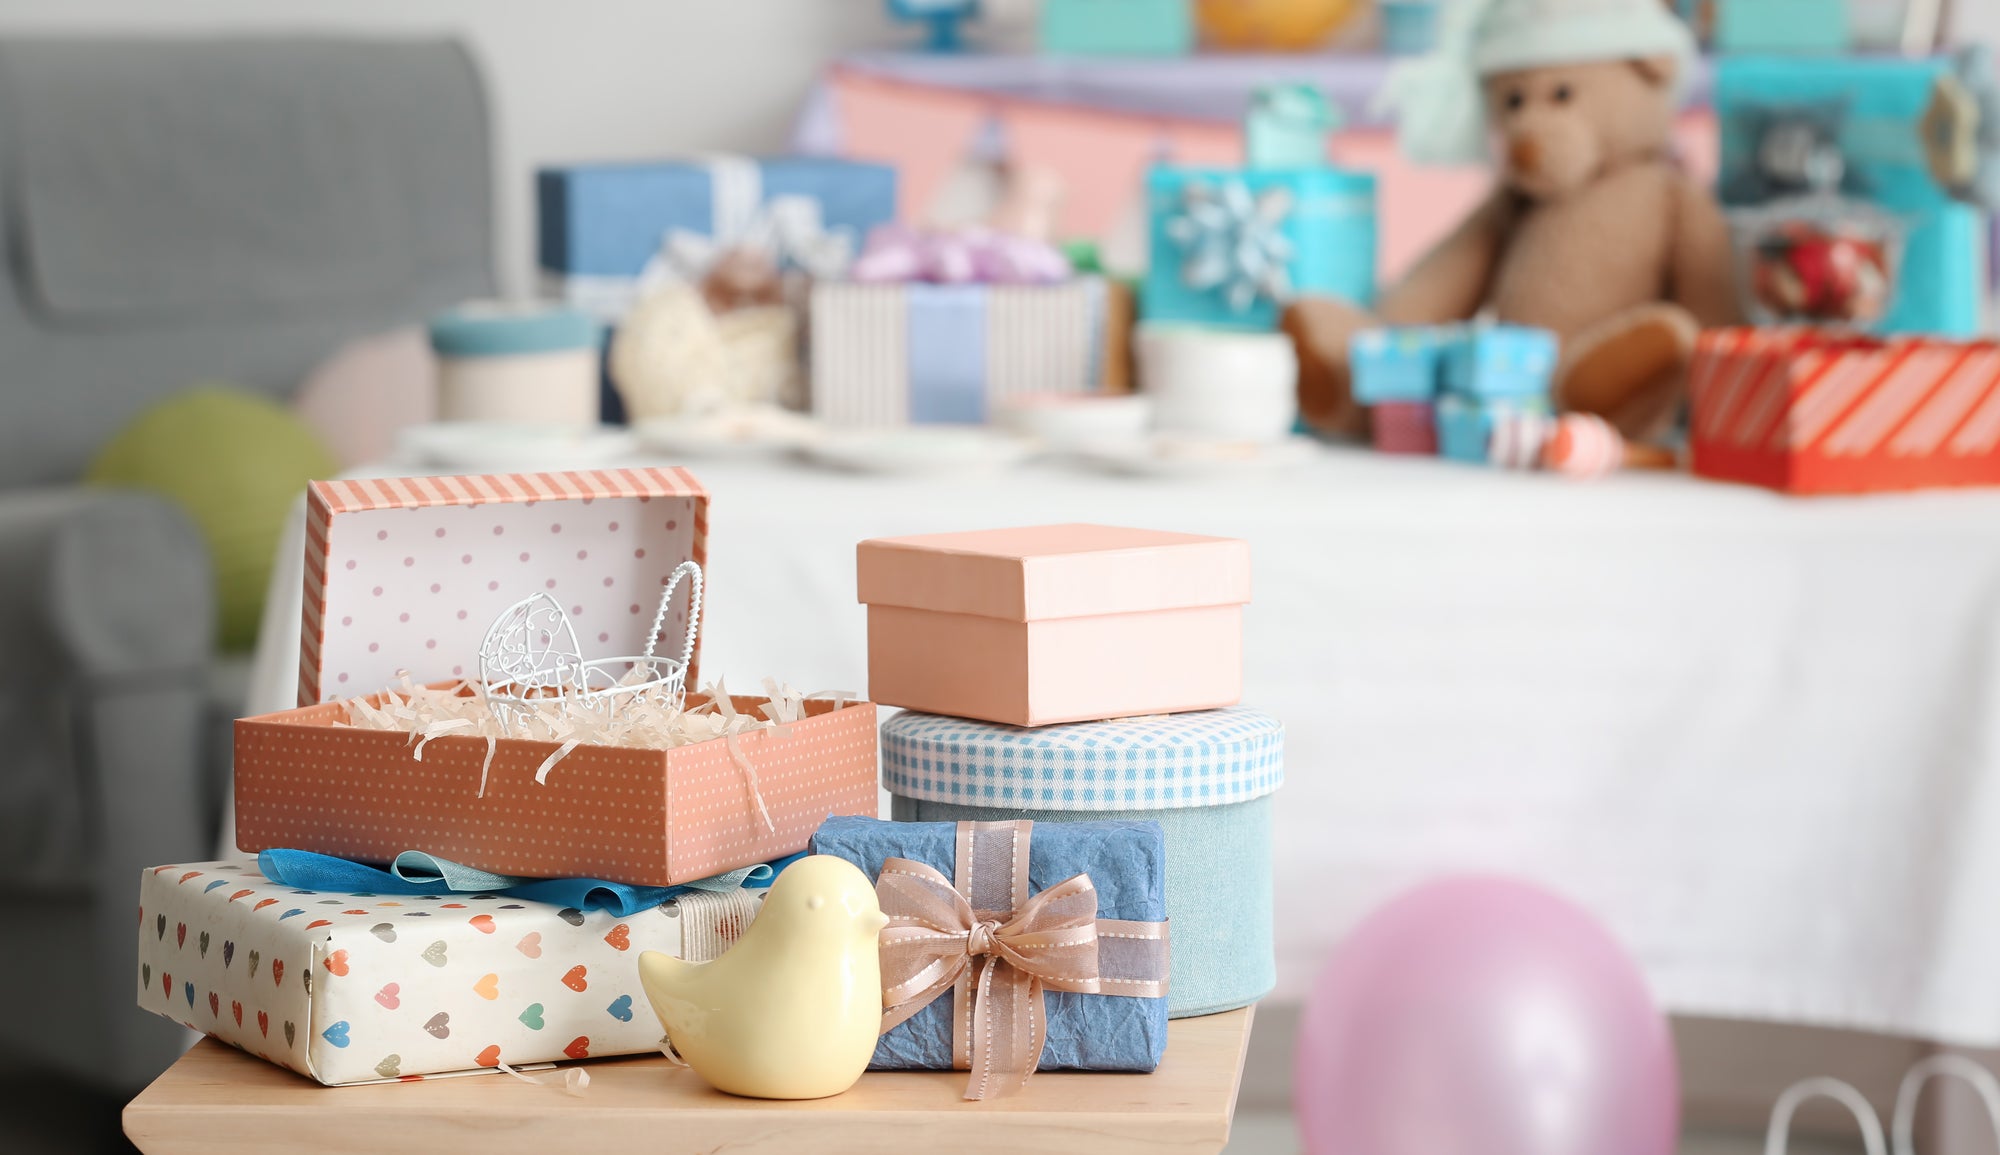 The 10 best gift ideas for a baby shower that parents love